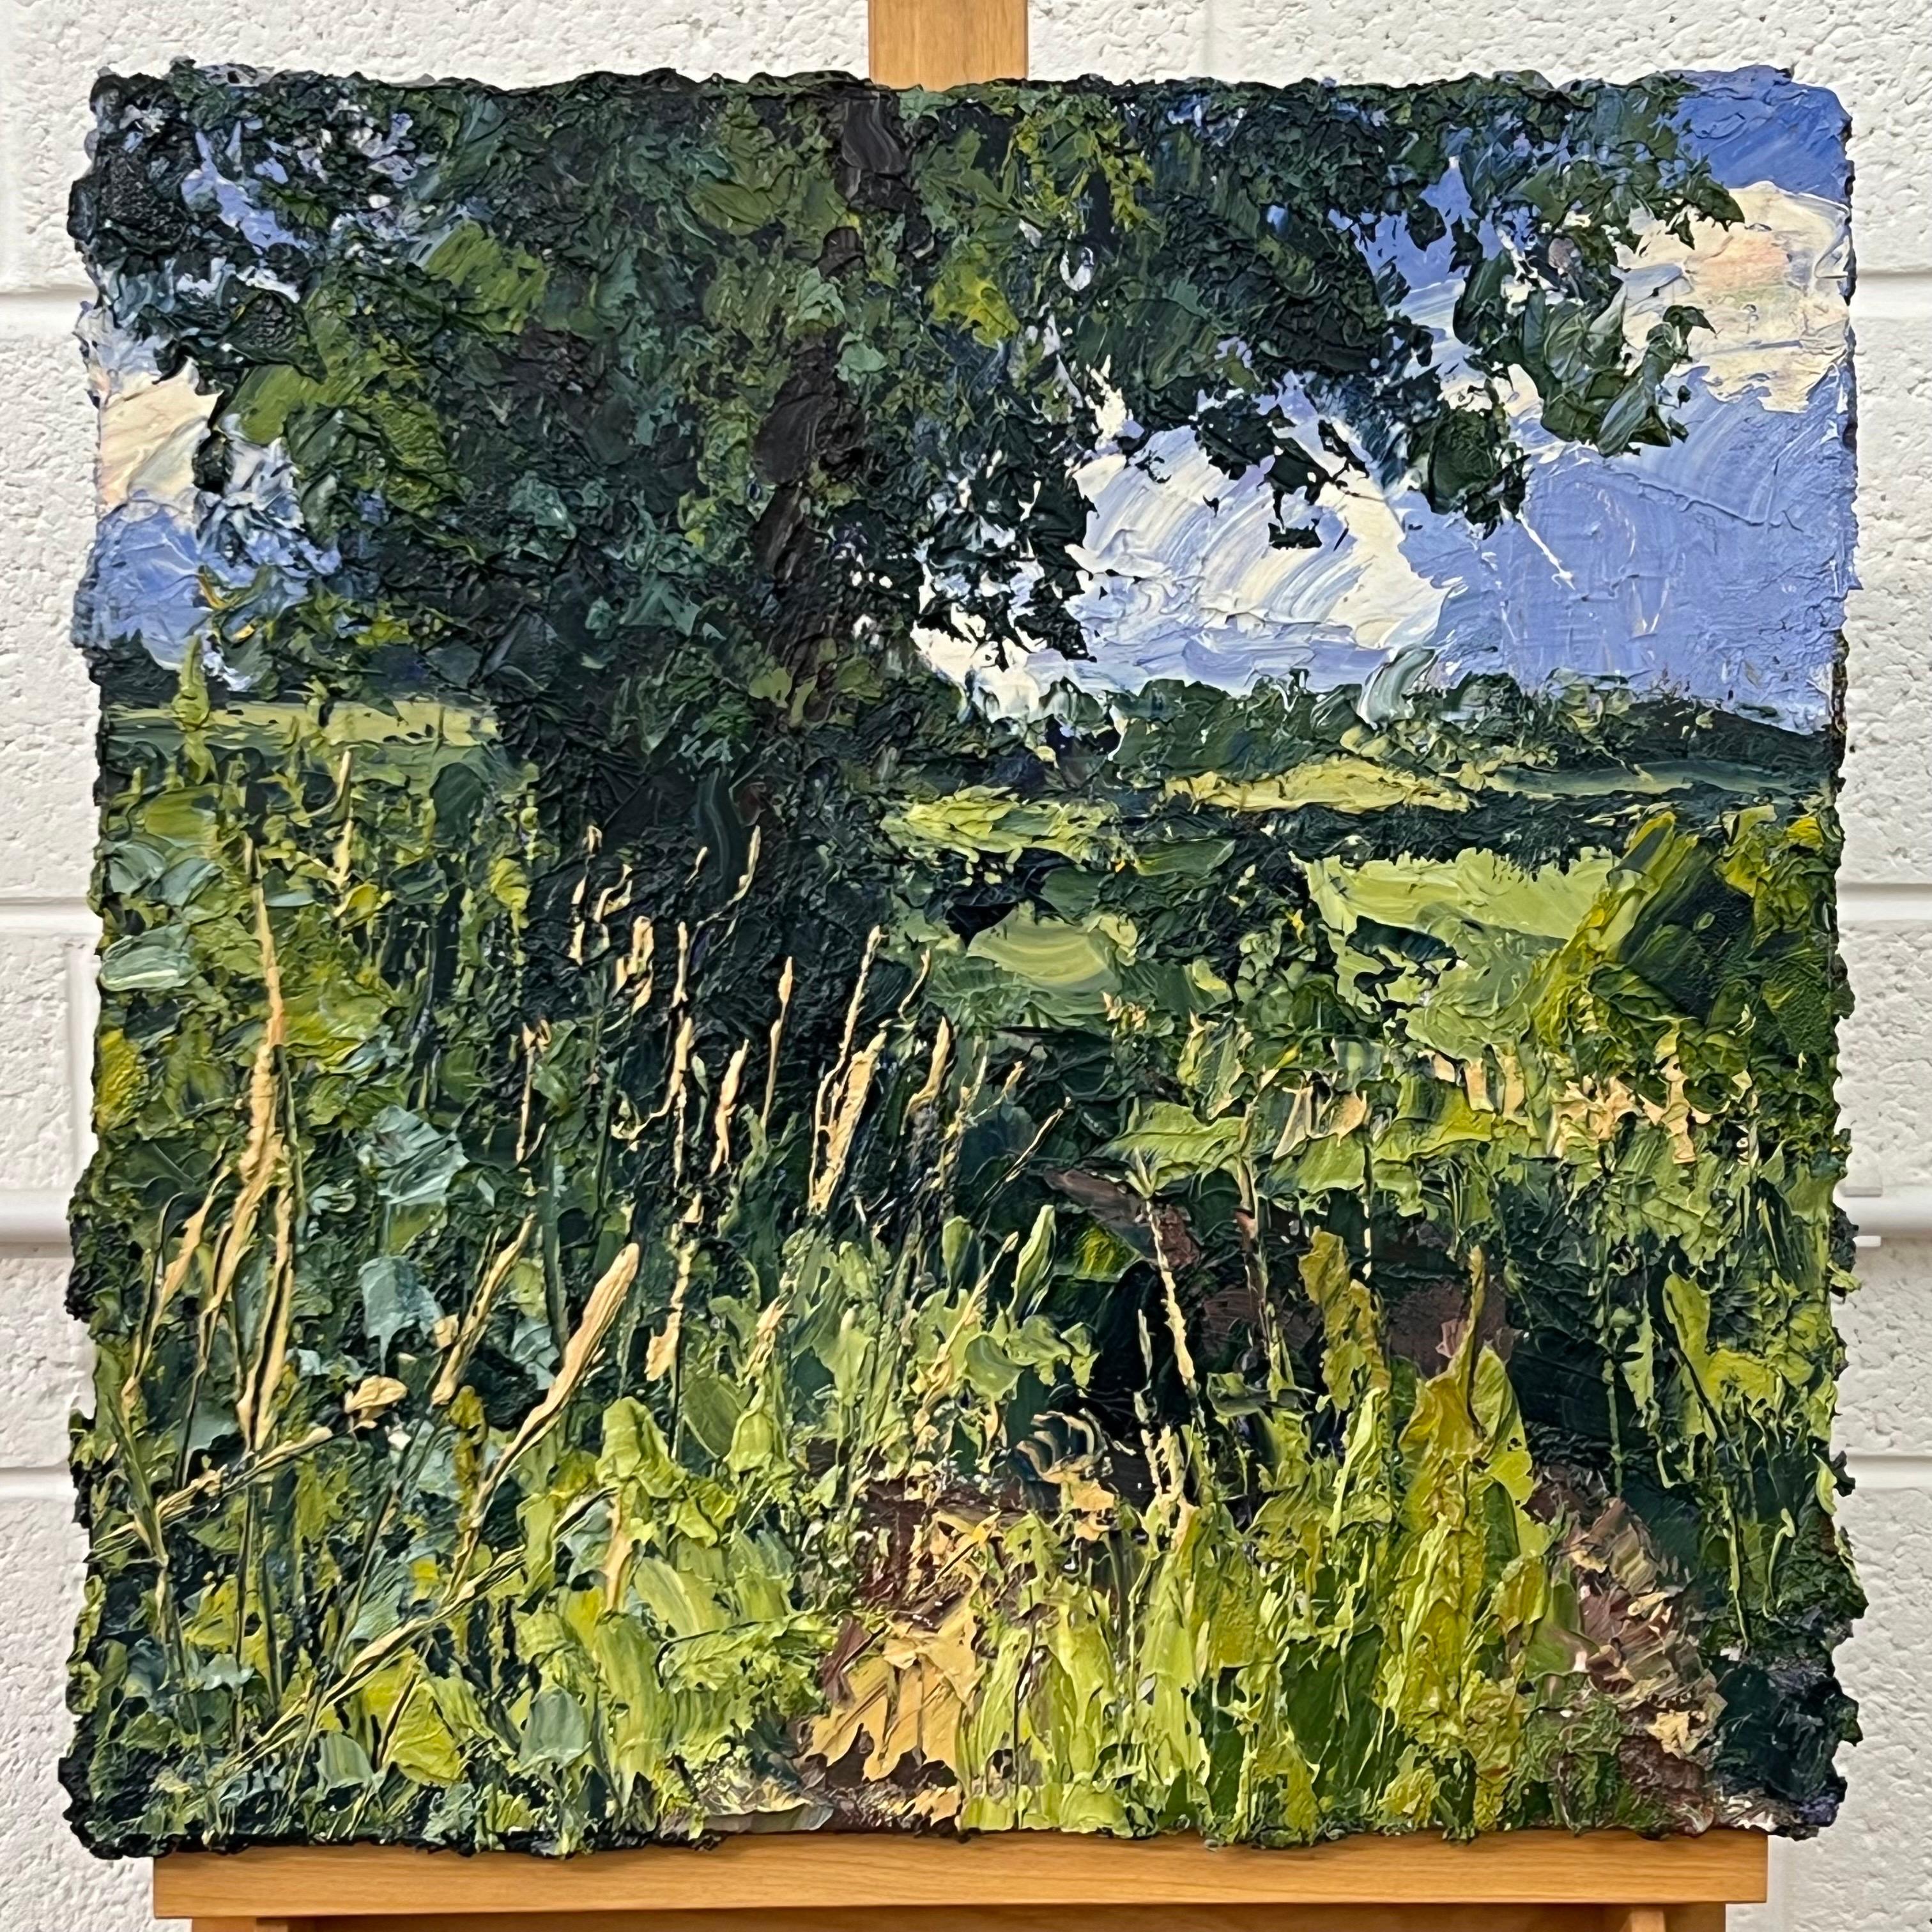 English Summer Impasto Oil Painting by British Landscape Artist, Colin Halliday. This impressionistic and expressive painting conveys a beautiful spring day in England, with wild flowers and long grass in the foreground. Painted en plein air.

Art